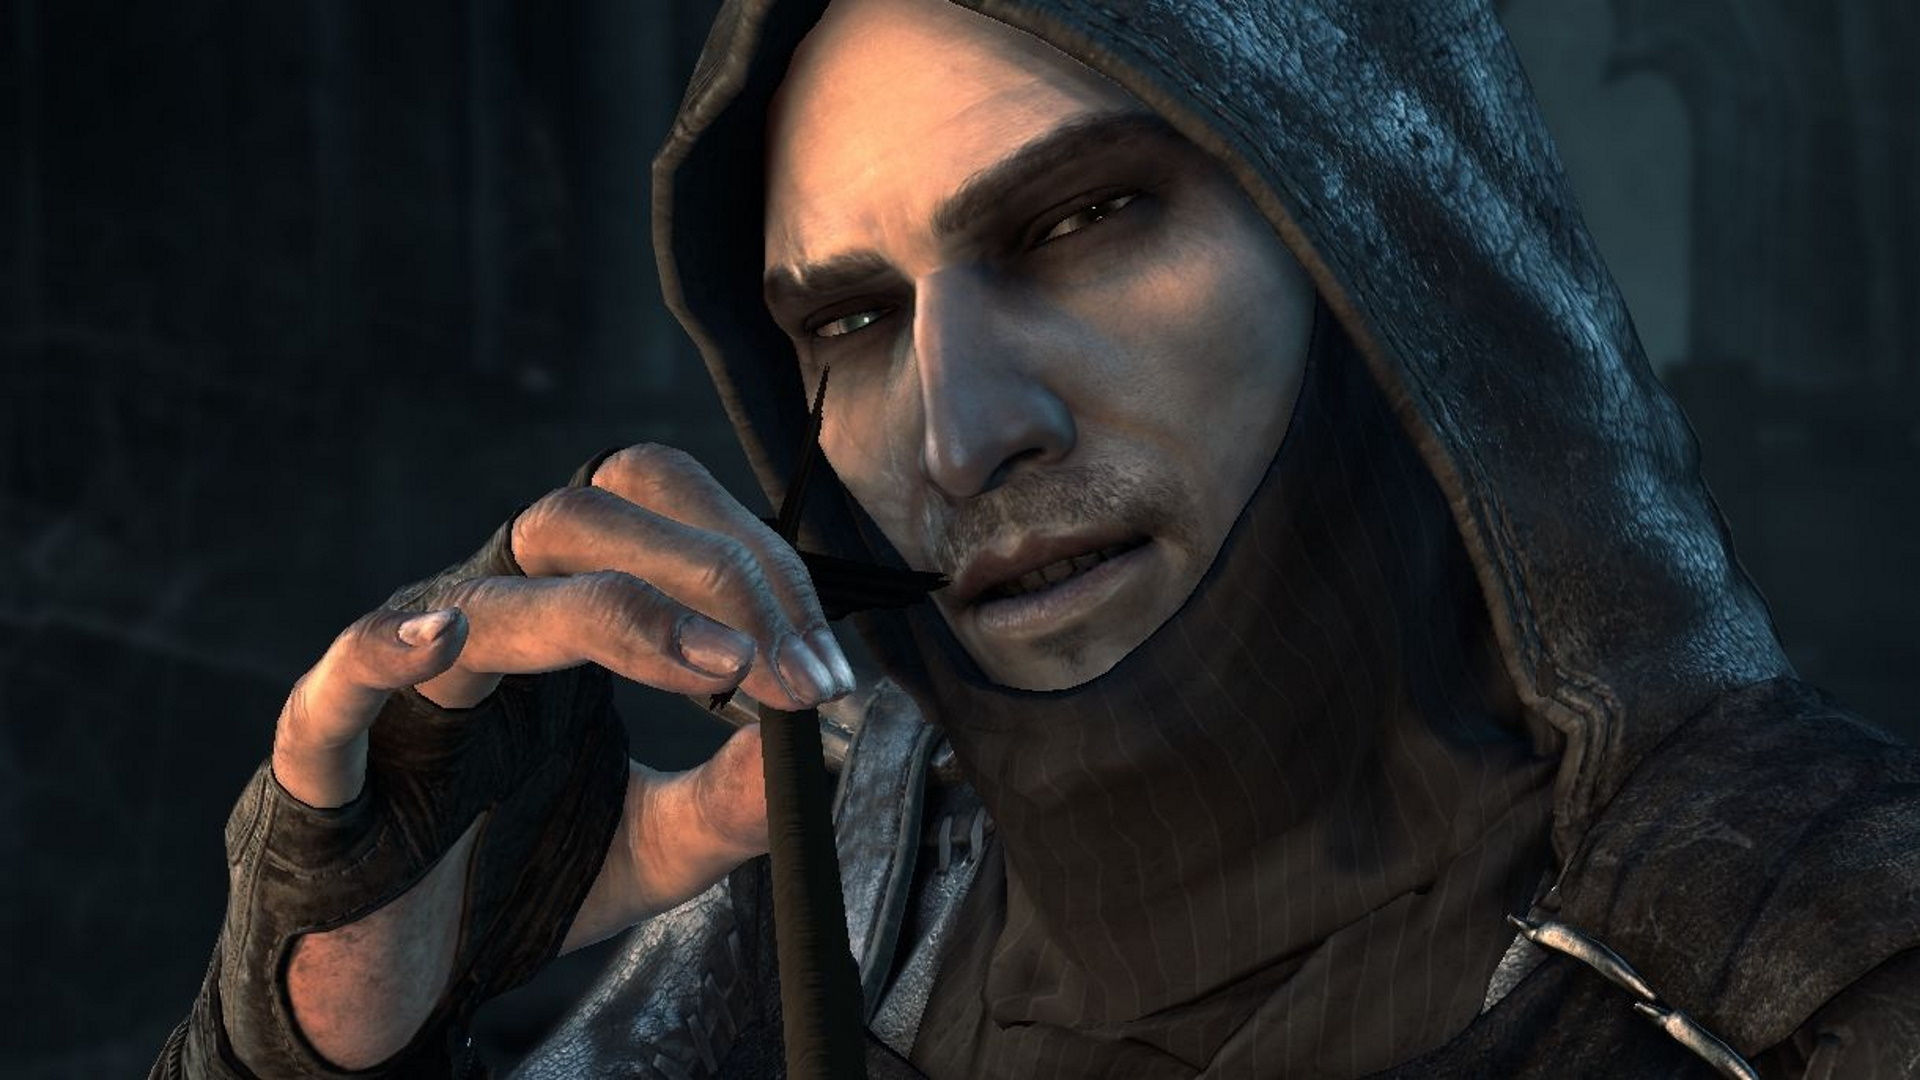 Thief 2 prototype is an enticing look at the action game's early days